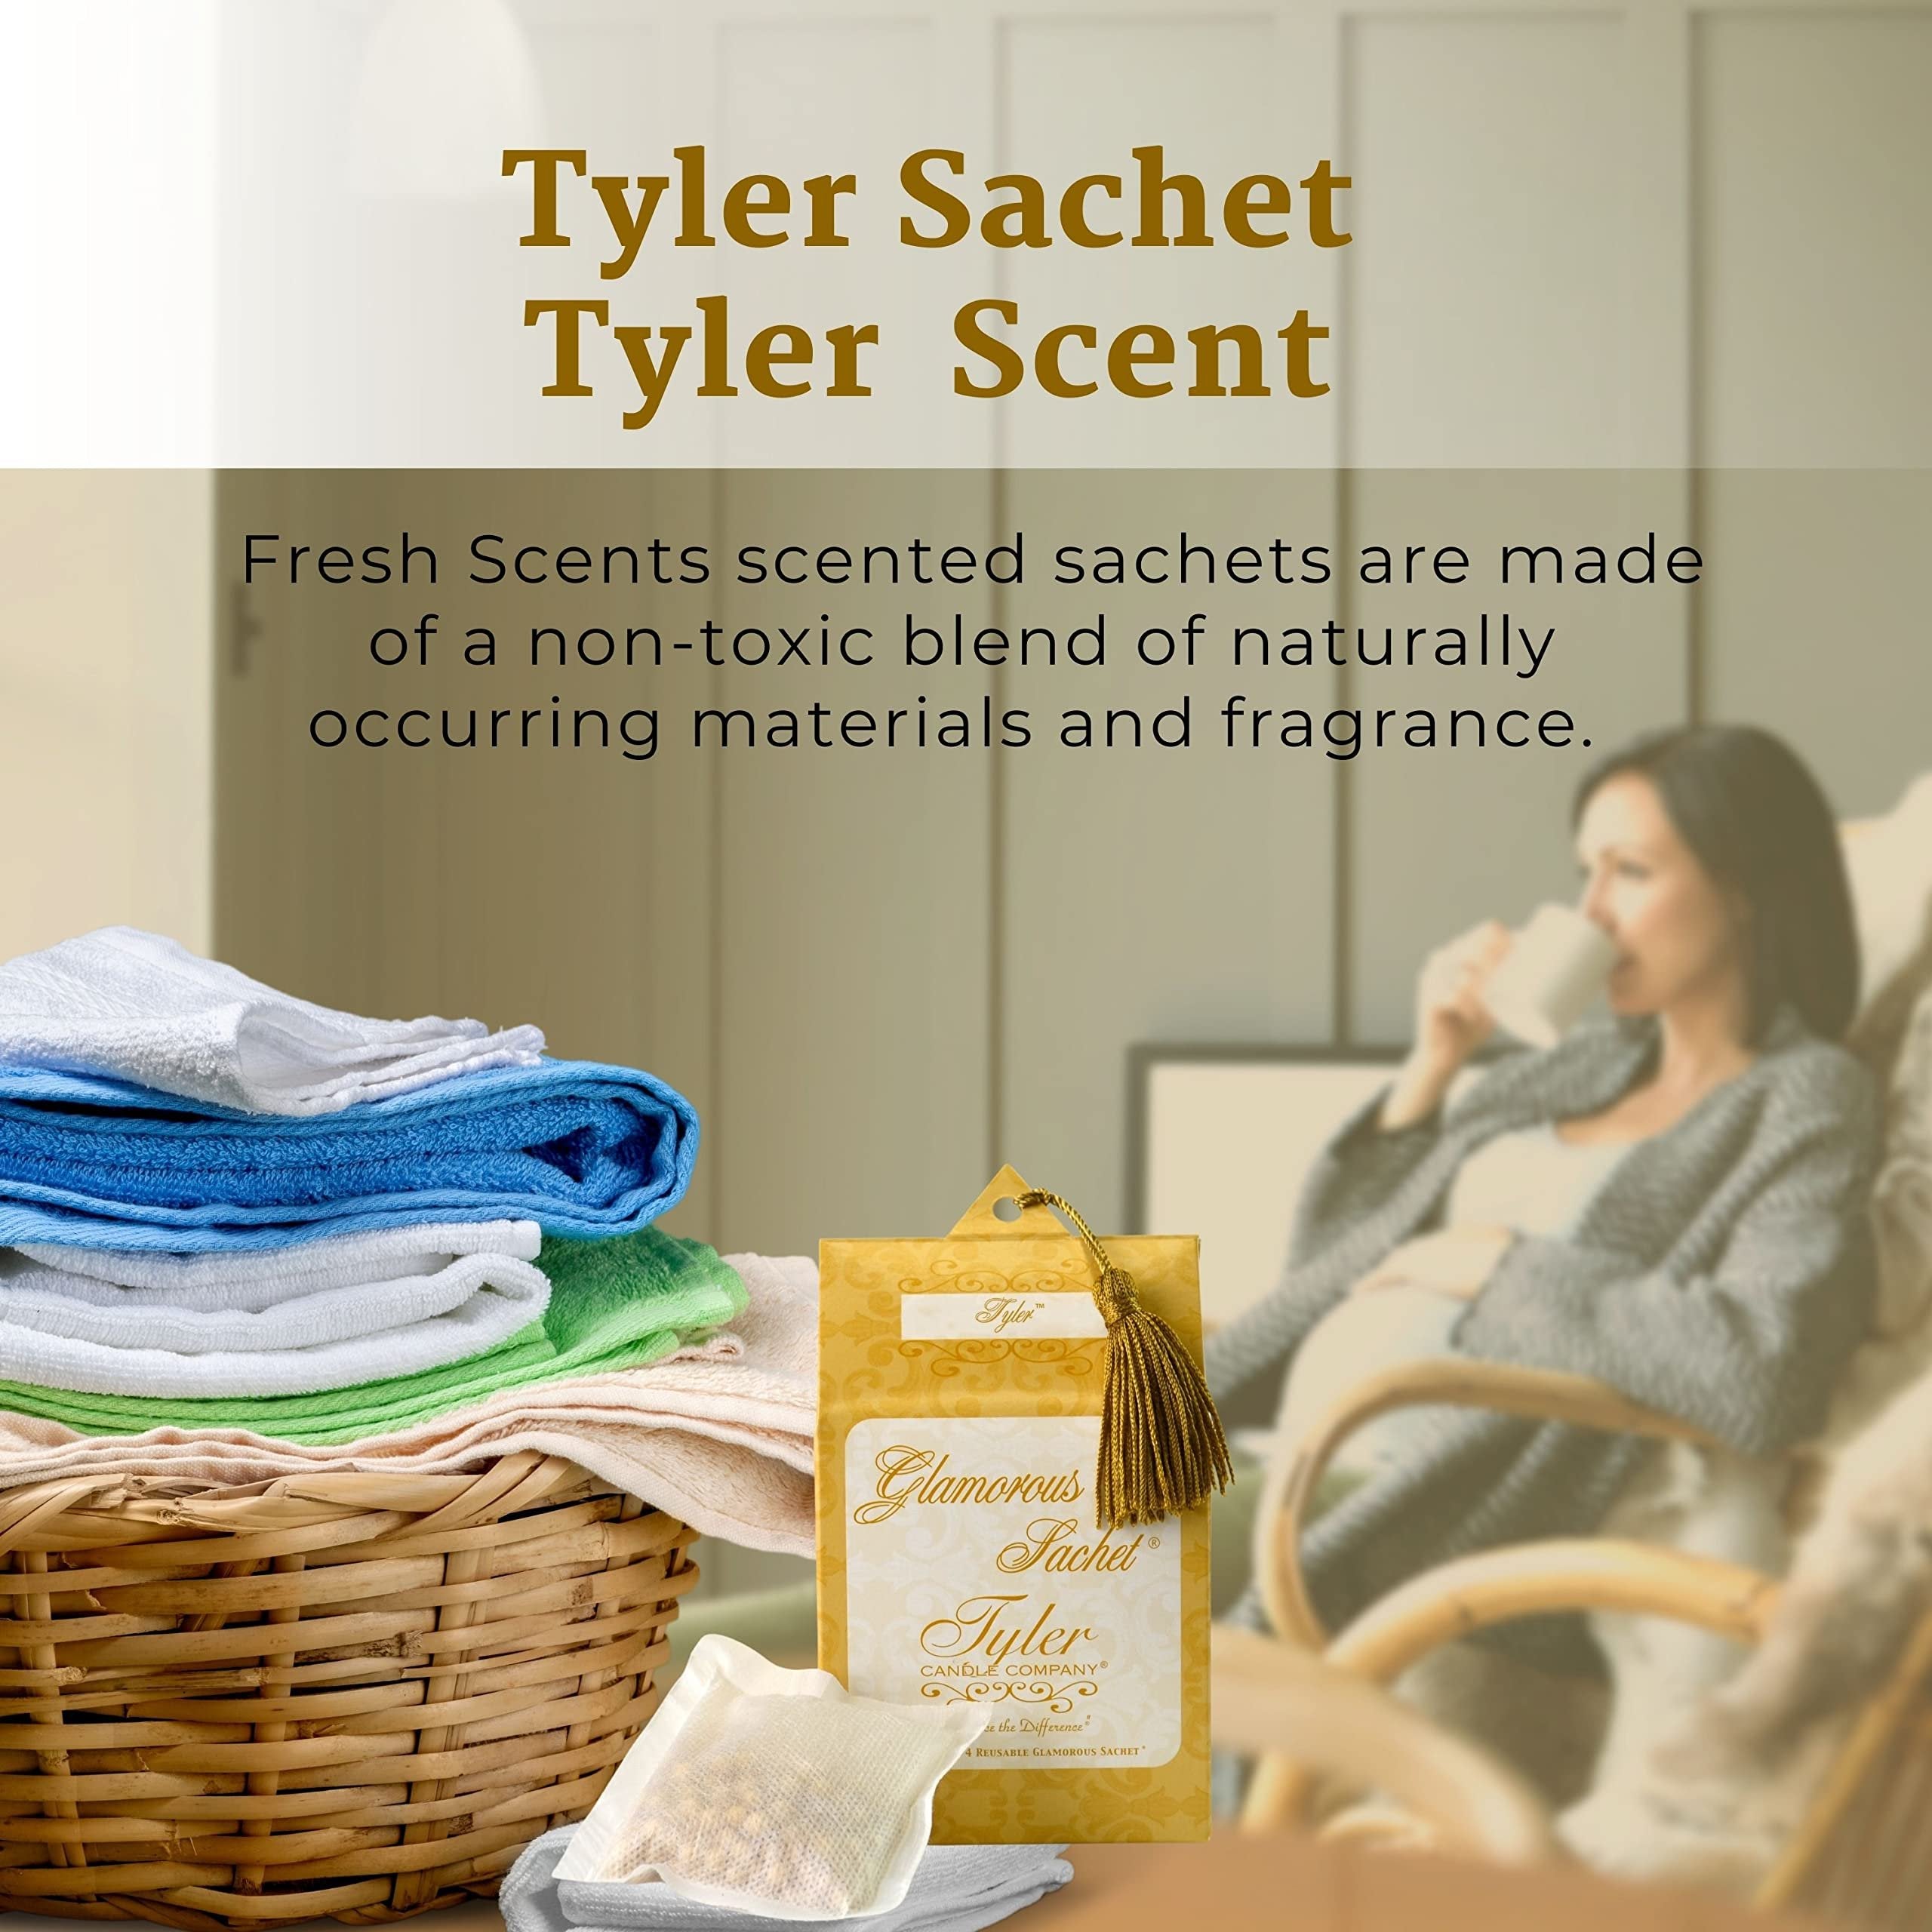 Tyler Candle Company Tyler Scent Dryer Sheet Sachets - Glamorous Reusable Dryer Sheets - Sachets for Drawers and Closets - 1 Pack, 4 Sachets, Dryer, Home, or Personal Sachet, with Bonus Key Chain